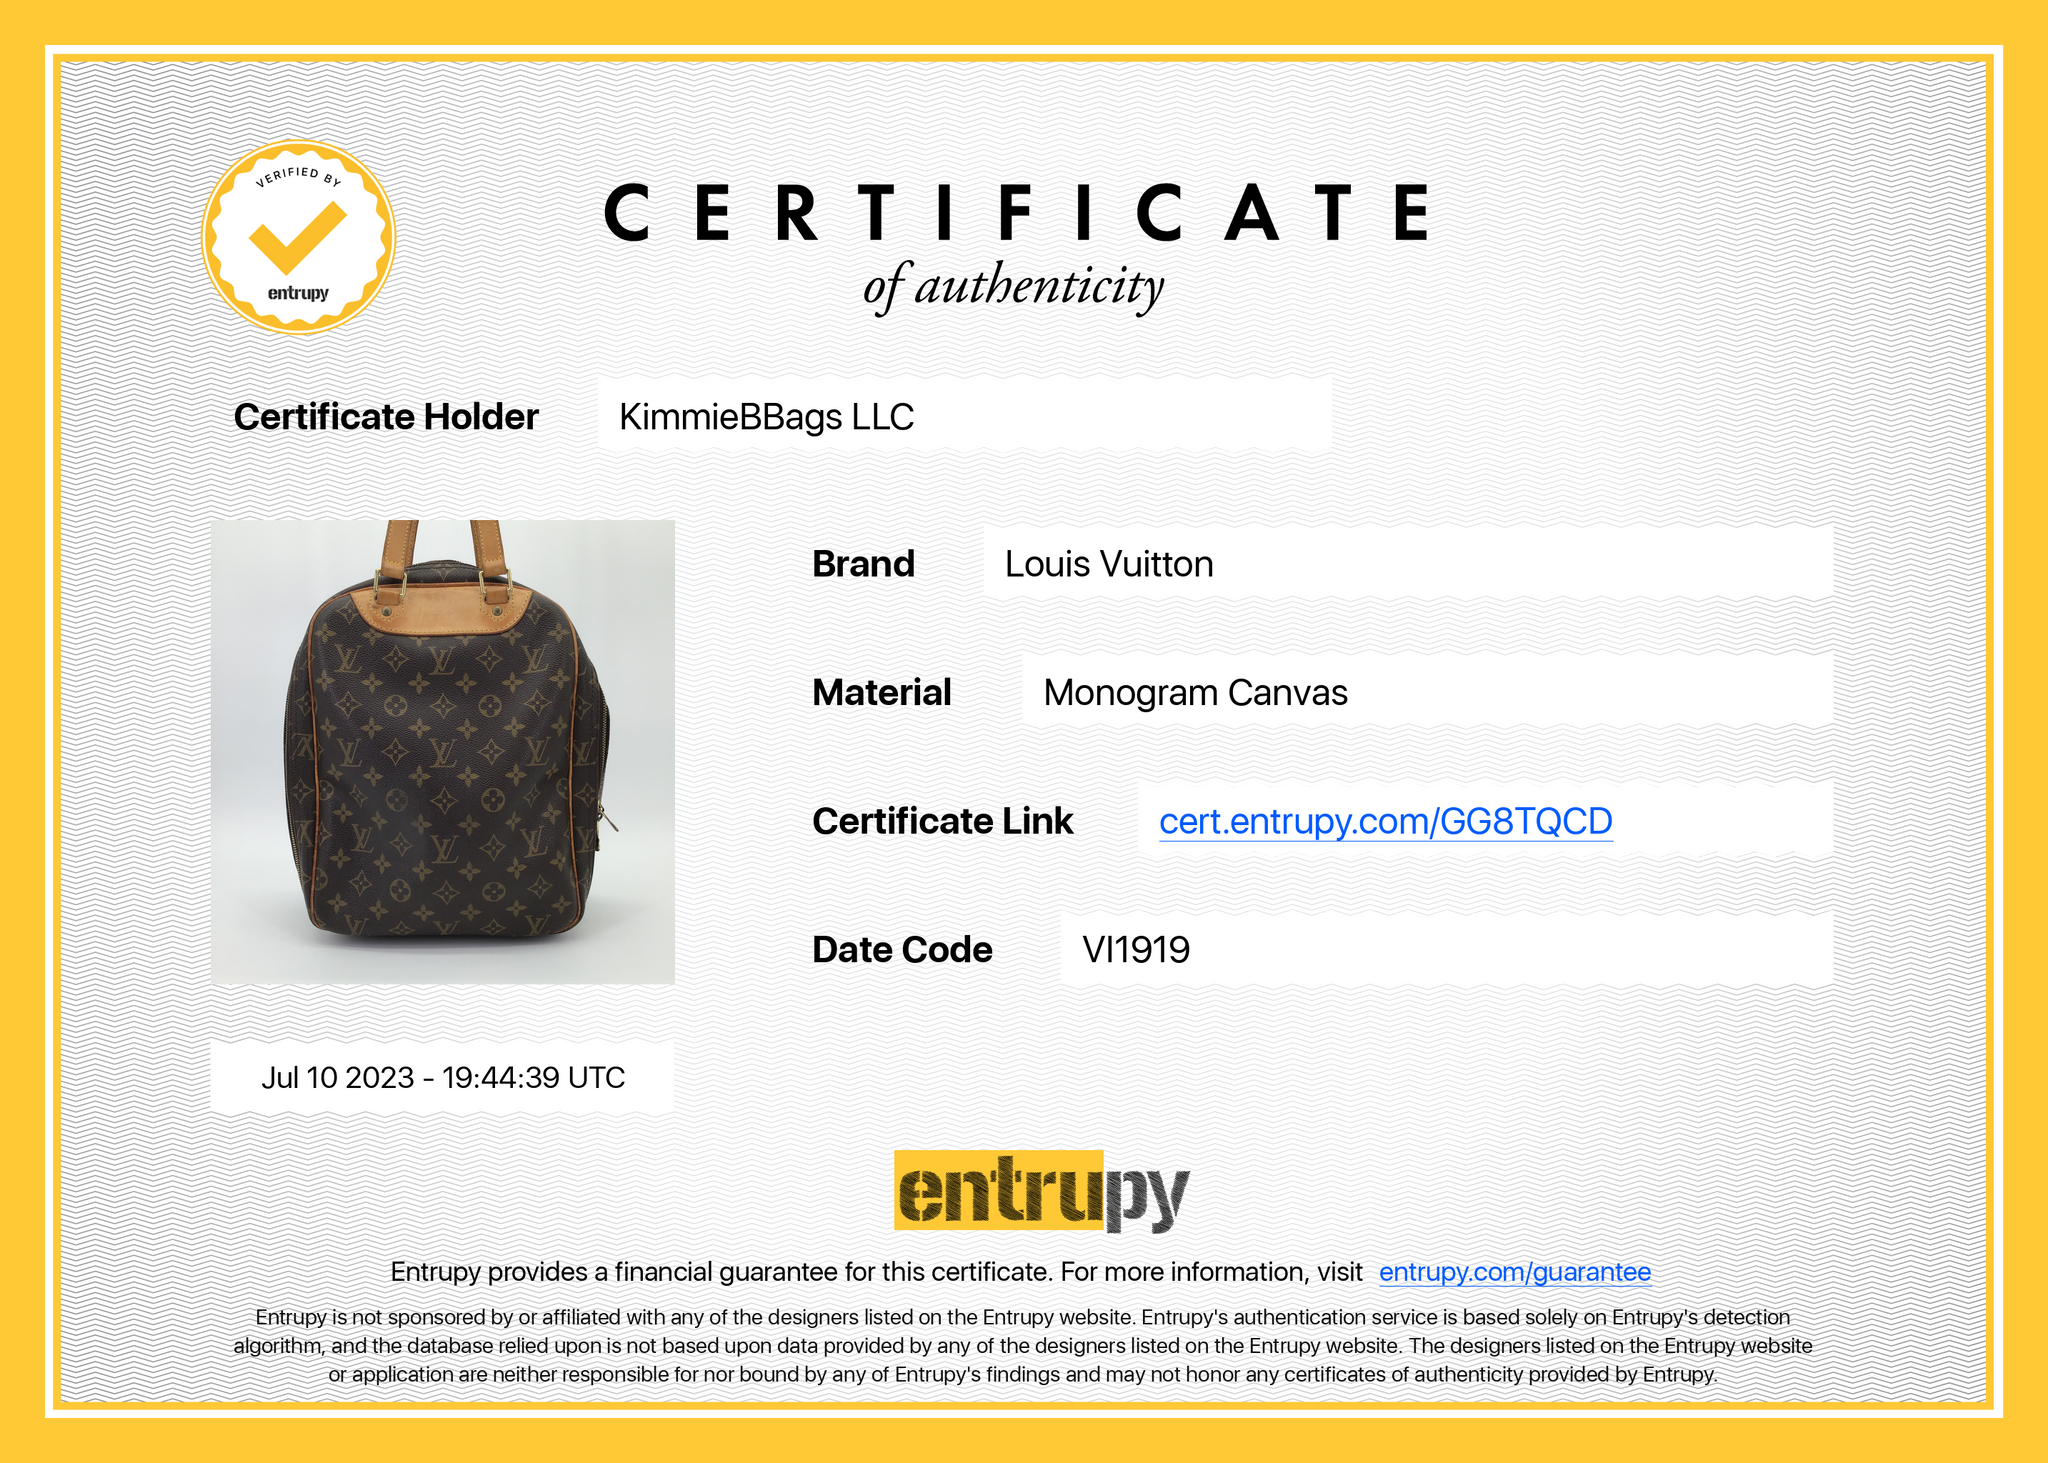 used Pre-owned Authenticated Louis Vuitton Monogram Excursion Canvas Brown Handbag Top Handlebag Unisex (New with Defects), Adult Unisex, Size: Large